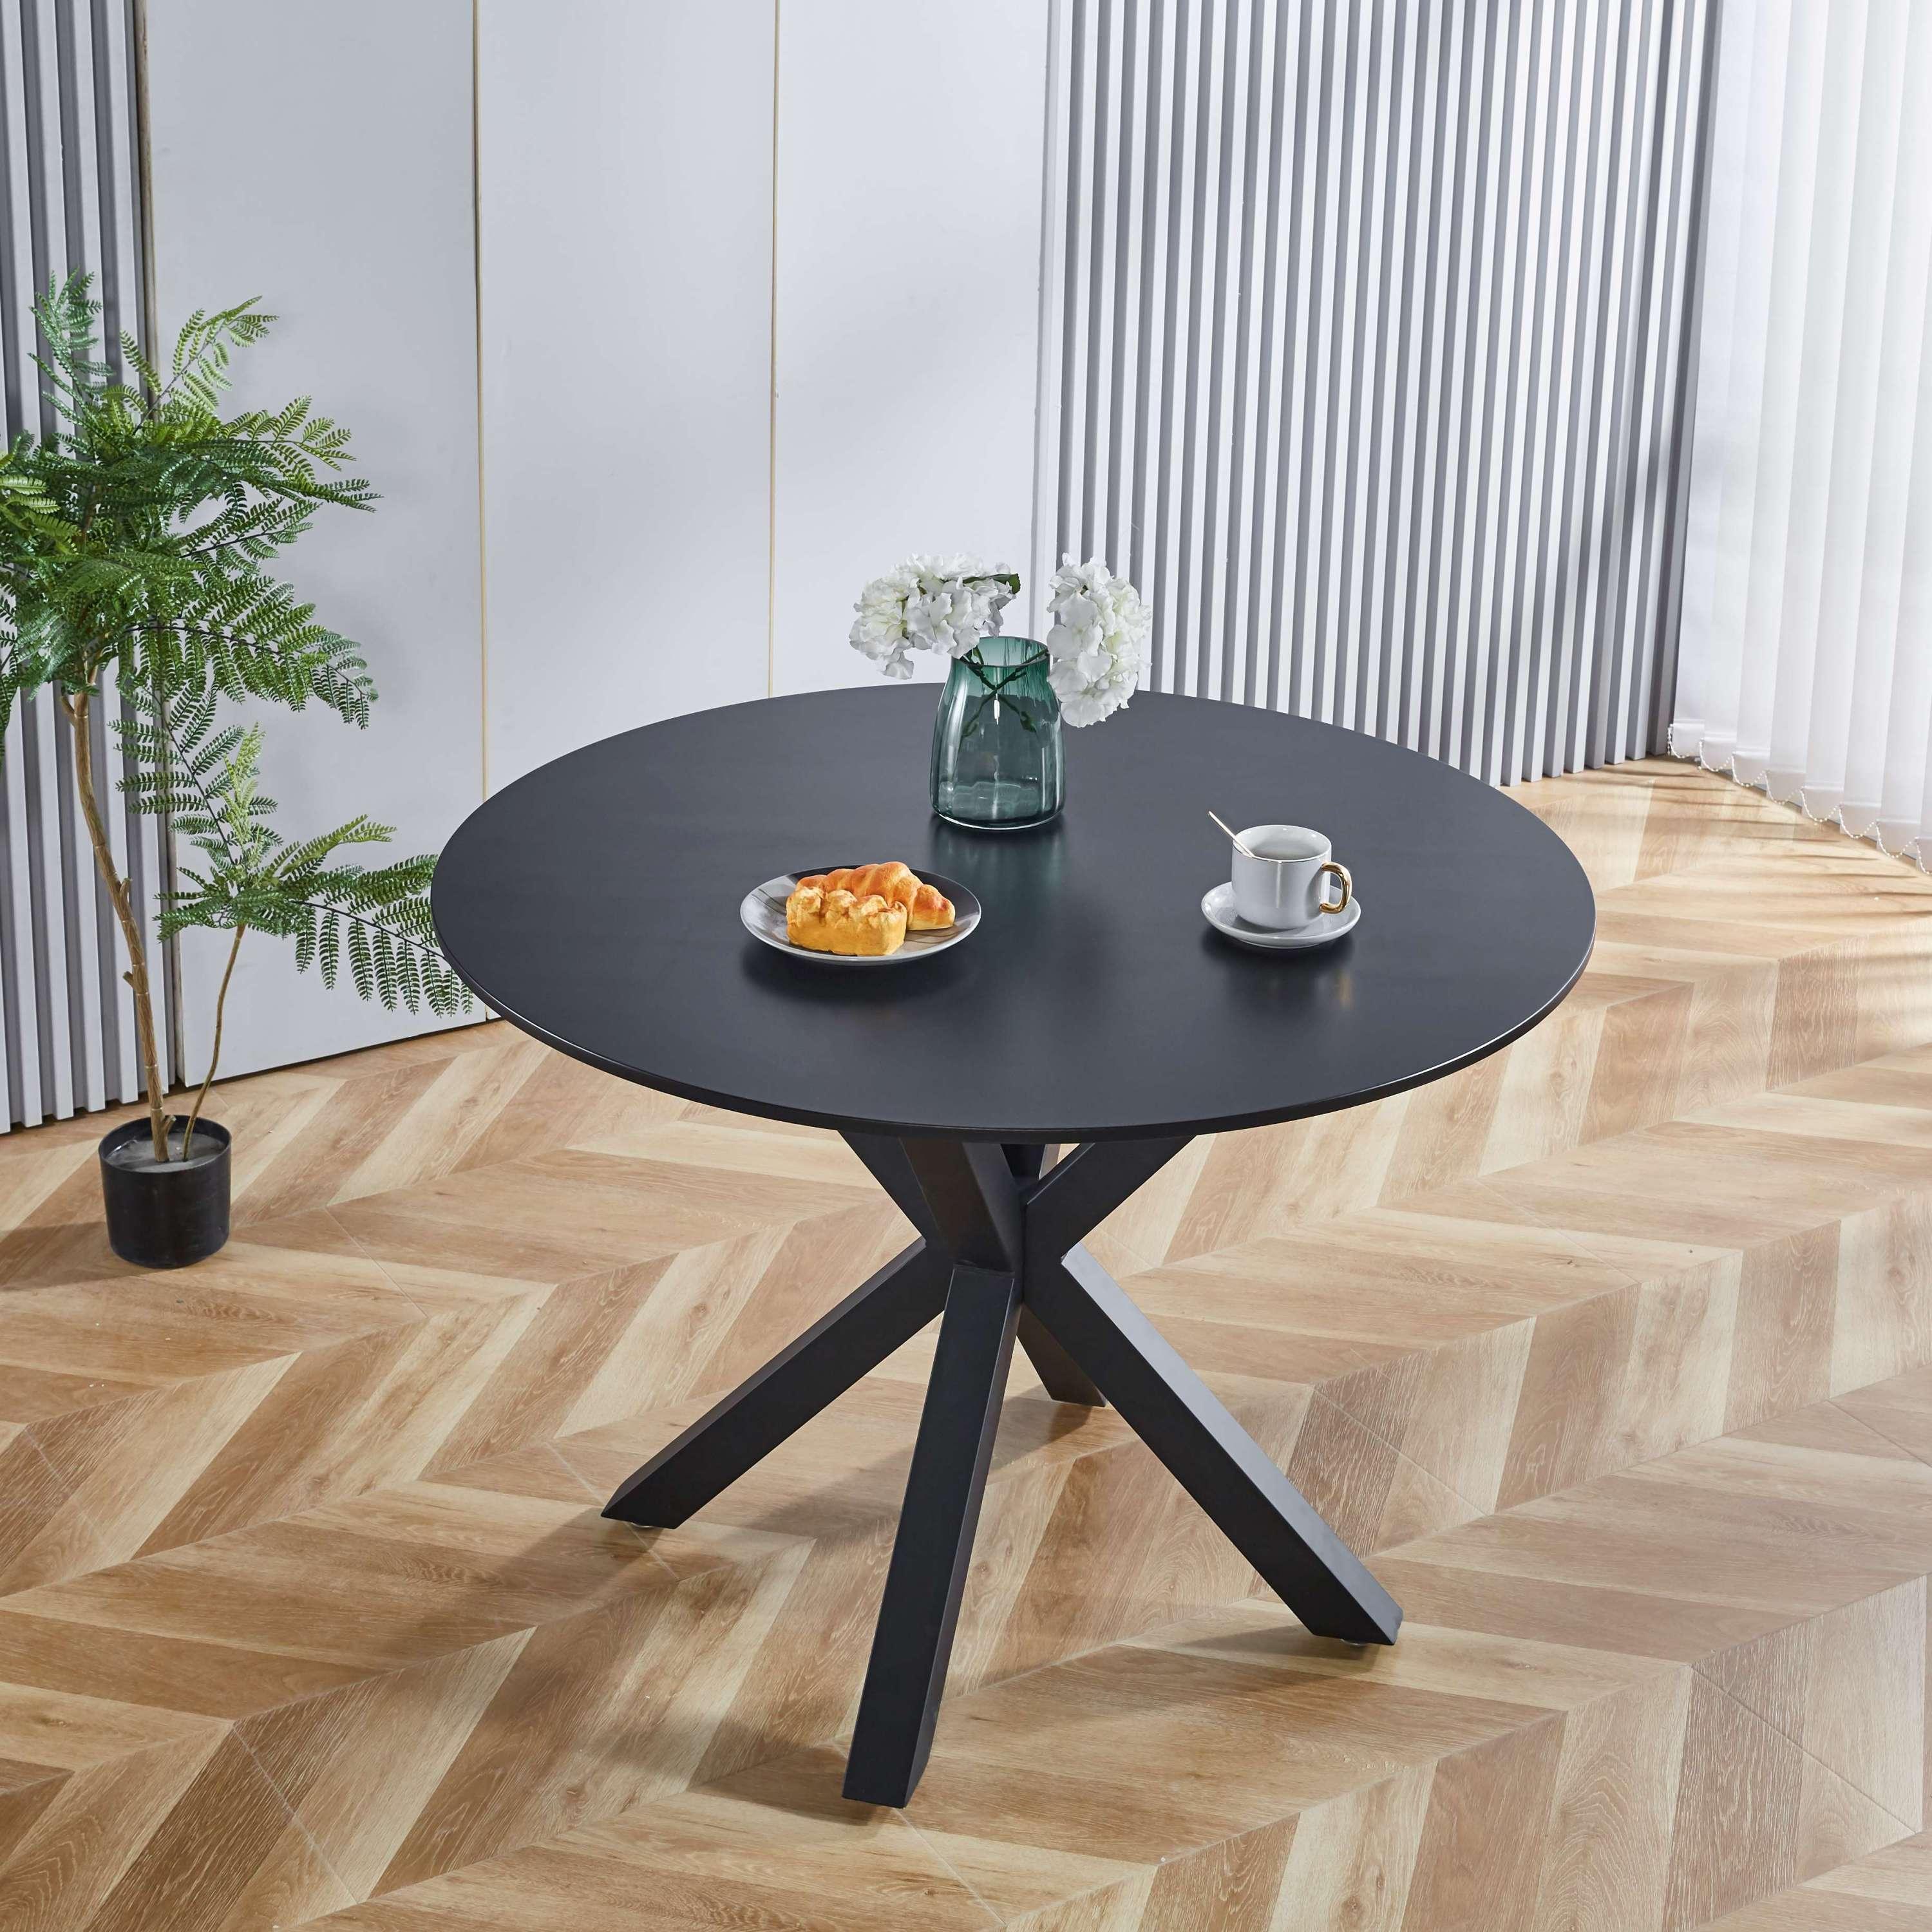 🆓🚛 42.1" Black Table Mid-Century Dining Table With Round Mdf Table Top, Pedestal Dining Table